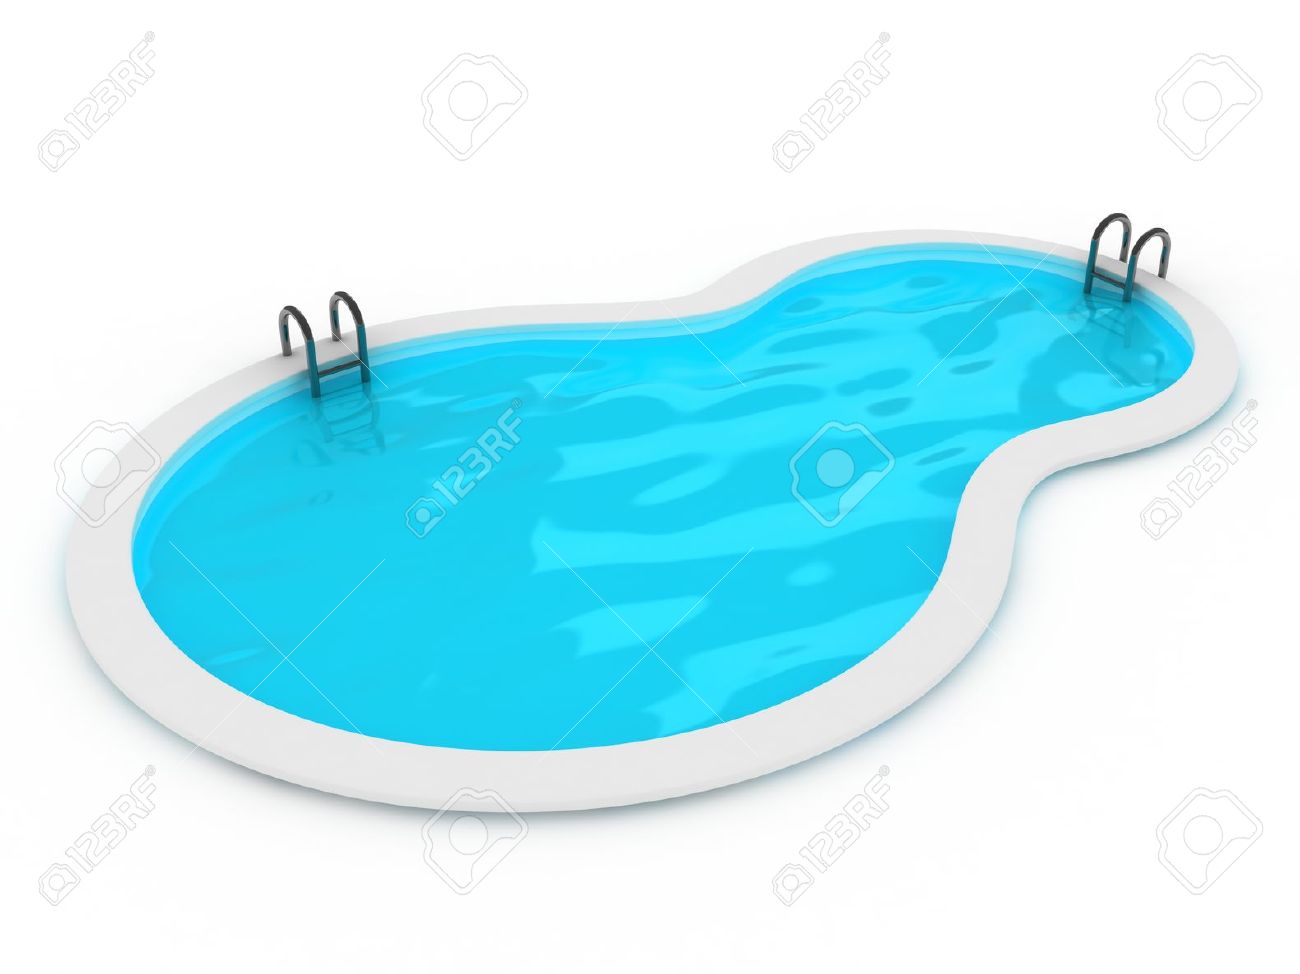 Pool Clipart.